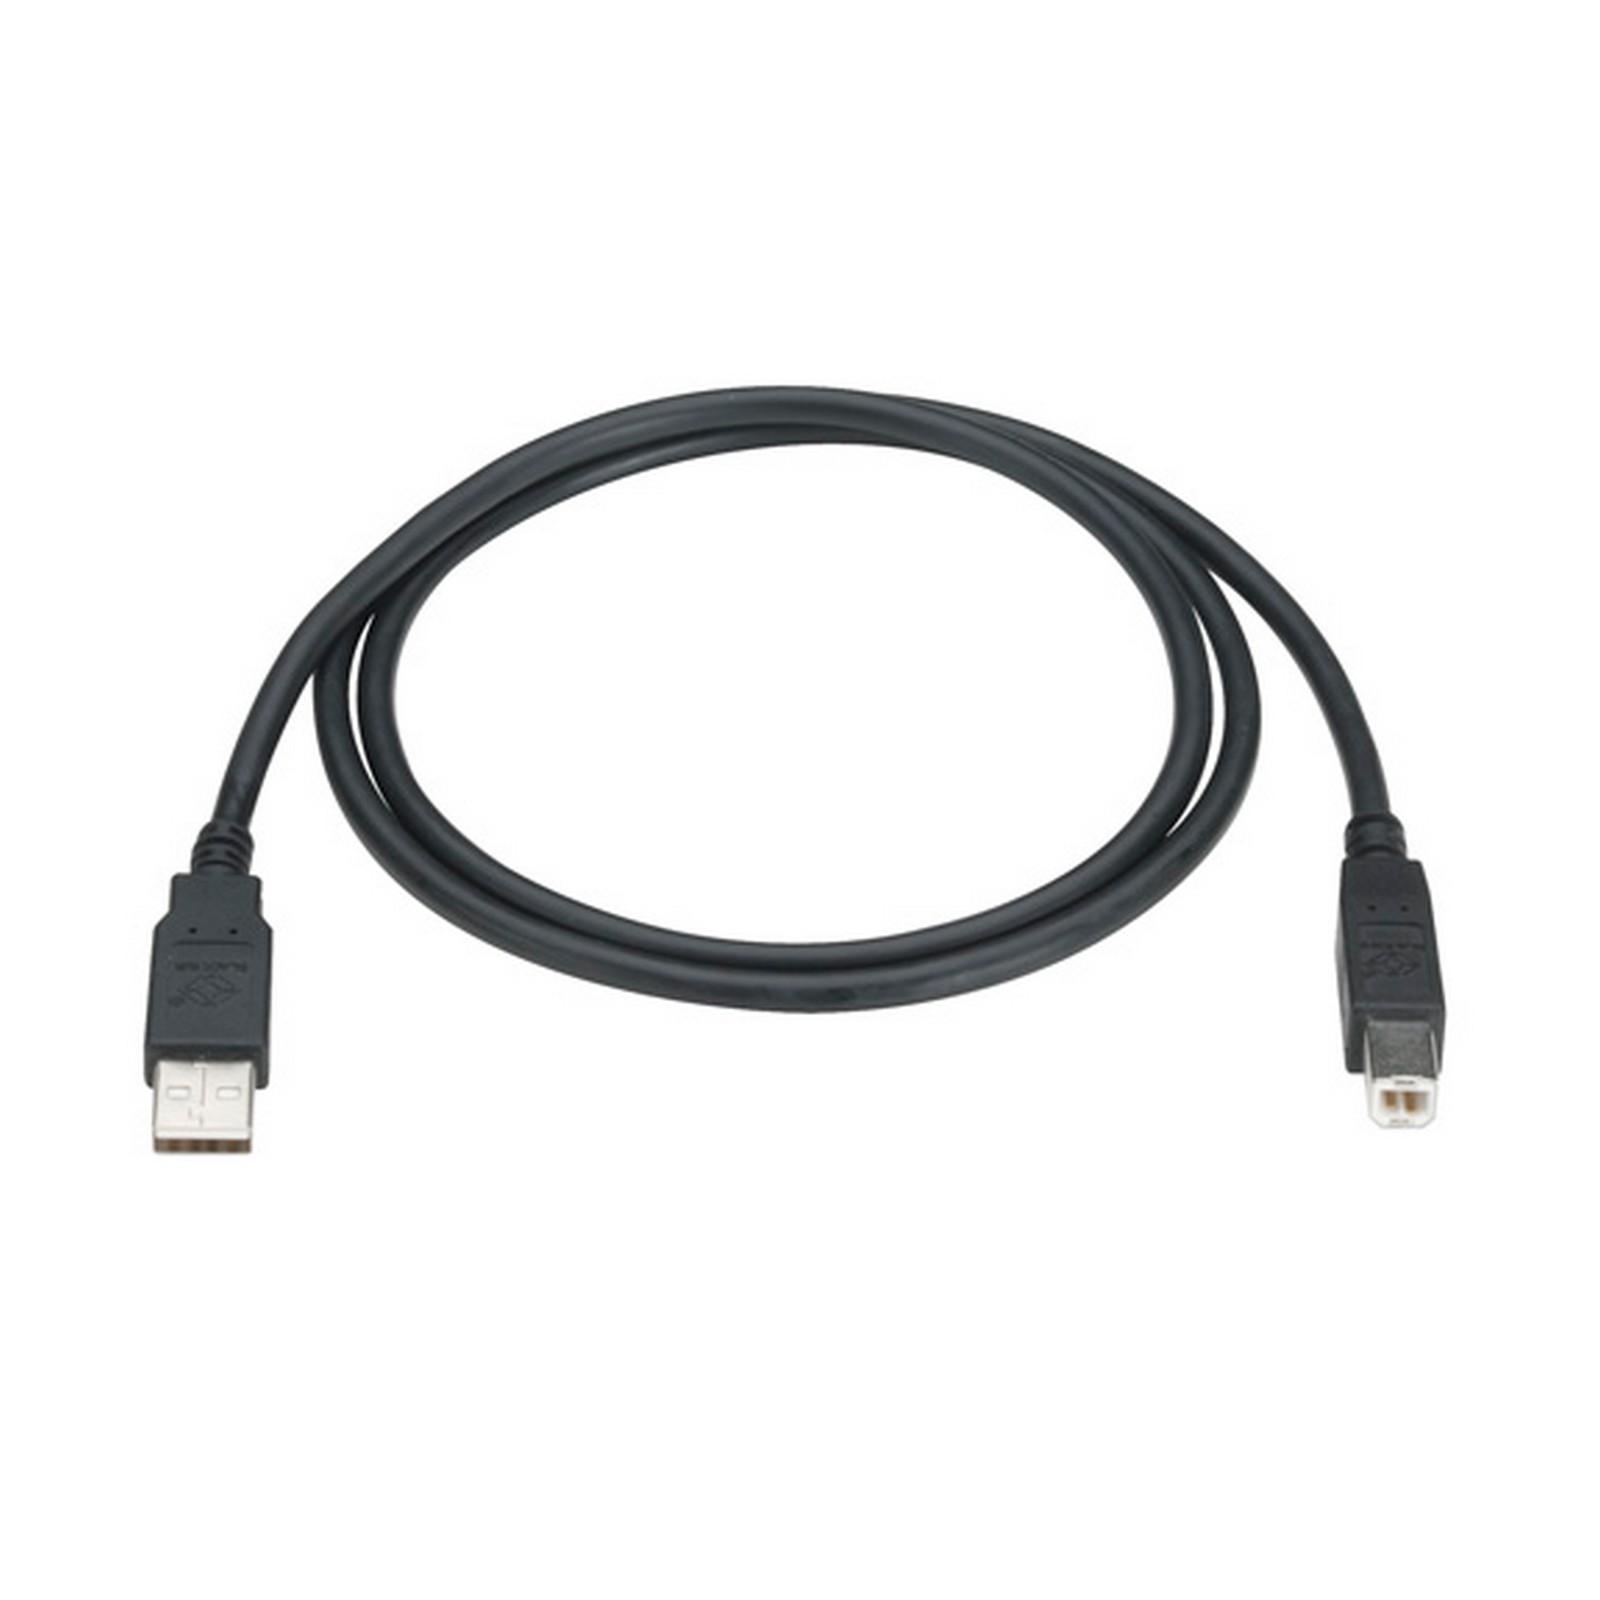 USB 2.0 Cable - Type A Male to Type B Male, Black, 15-ft. (4.6-m)